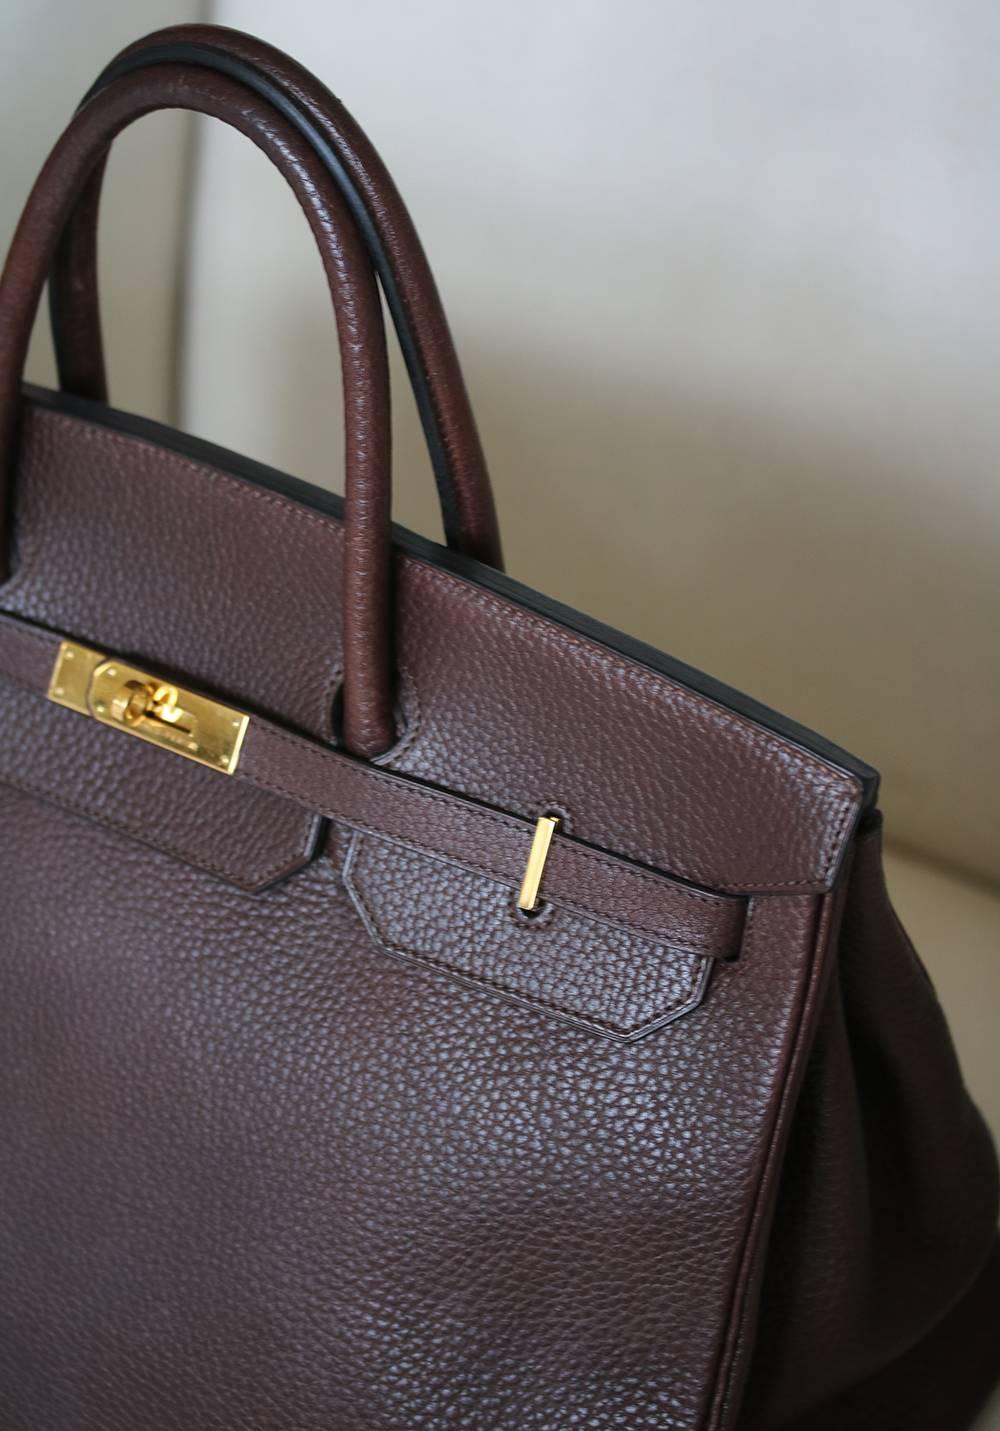 The most fabulous of all vintage bags can be yours today!

Luxuriously rich coloured with tonal top stitching.

This Birkin is in excellent condition - very minor scratching to the hardware. There is no damage to the corners - it has been carefully